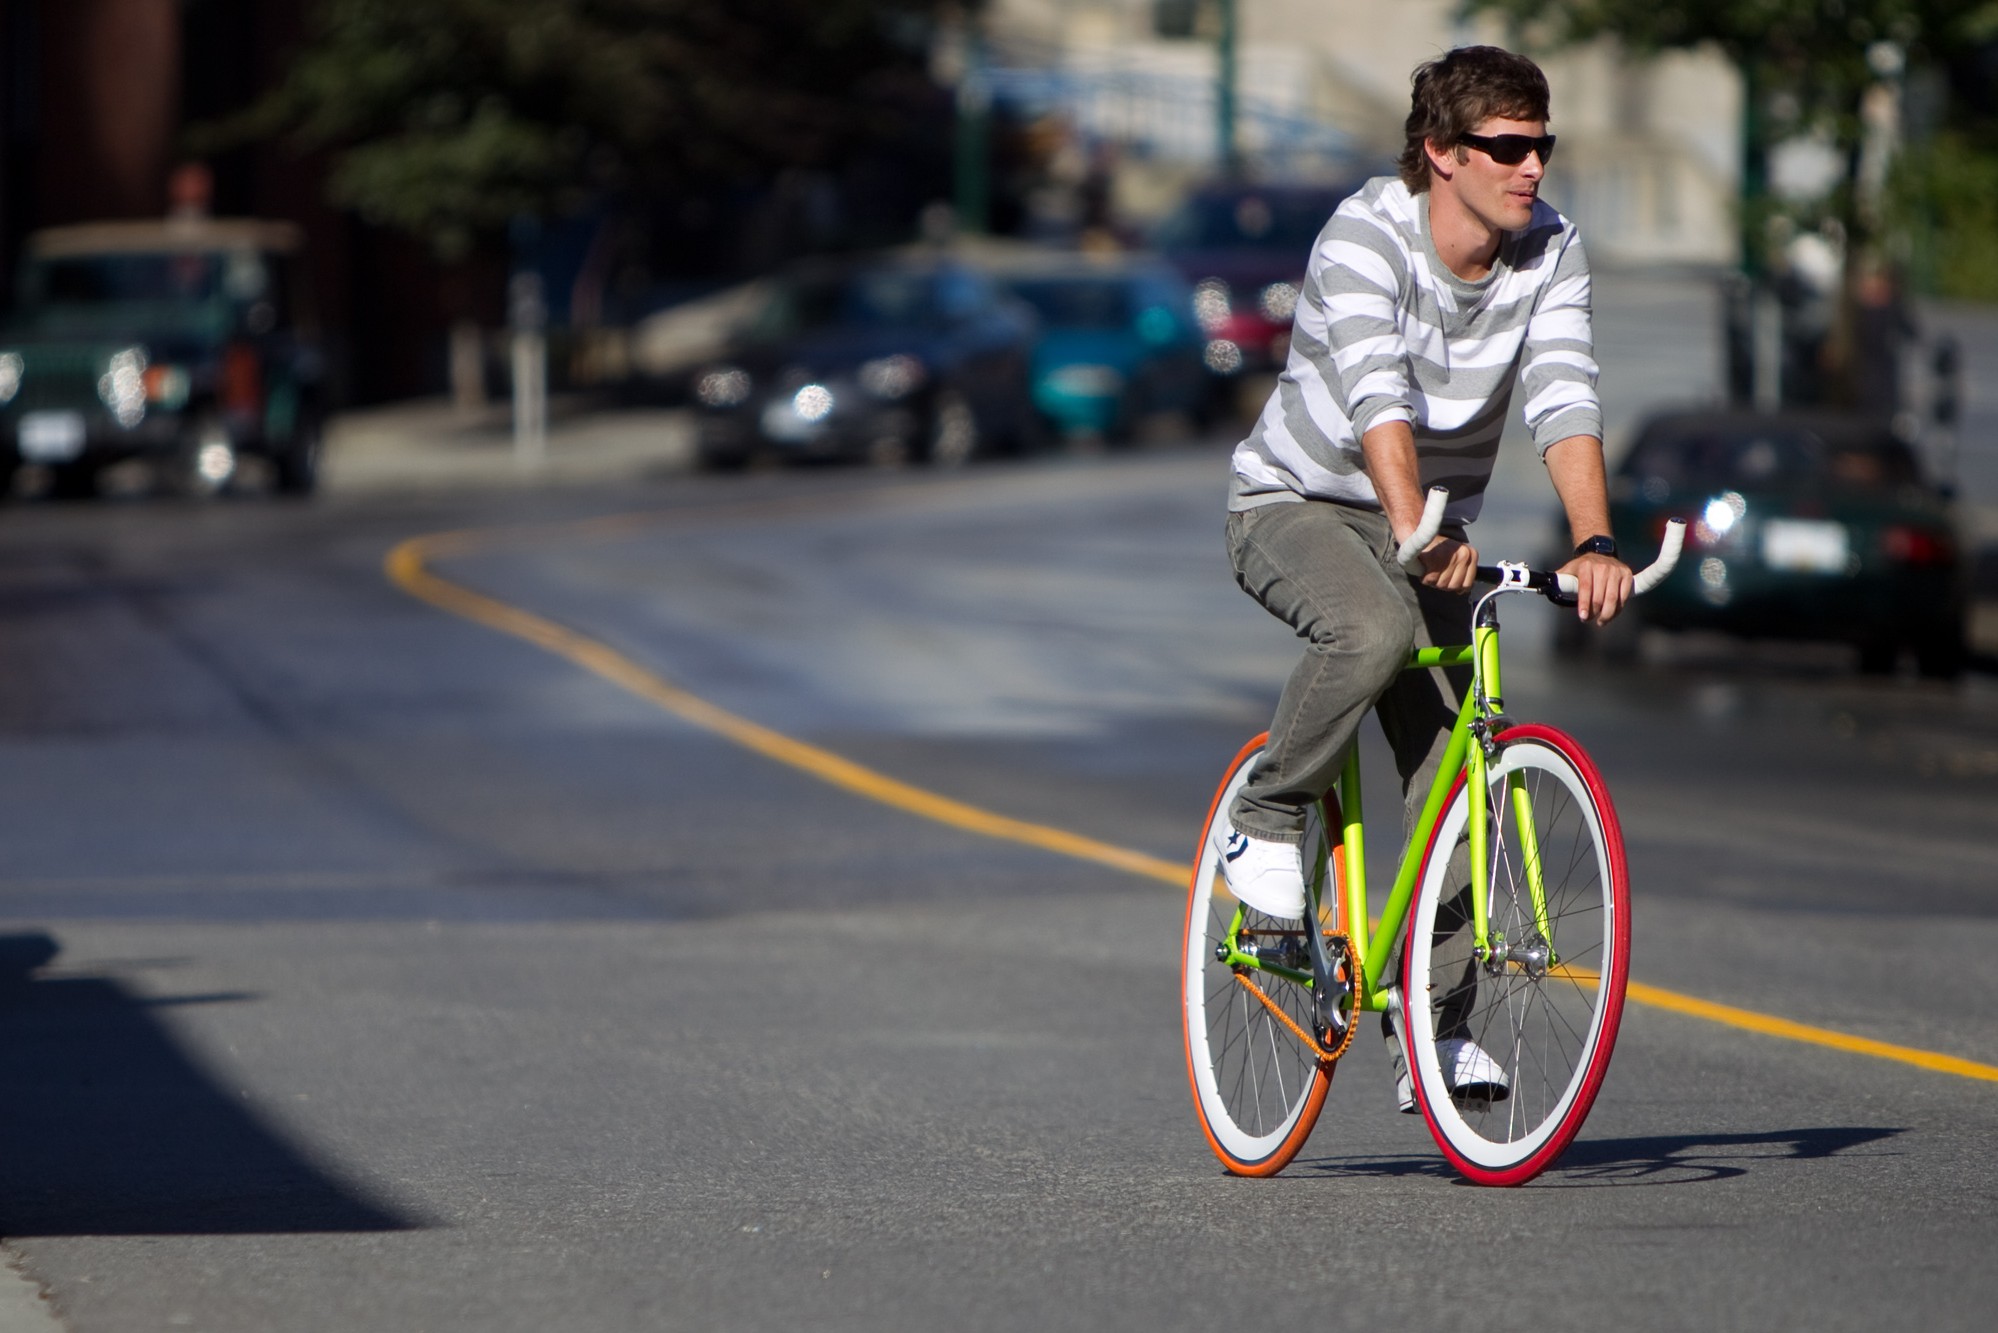 build your own fixie bike